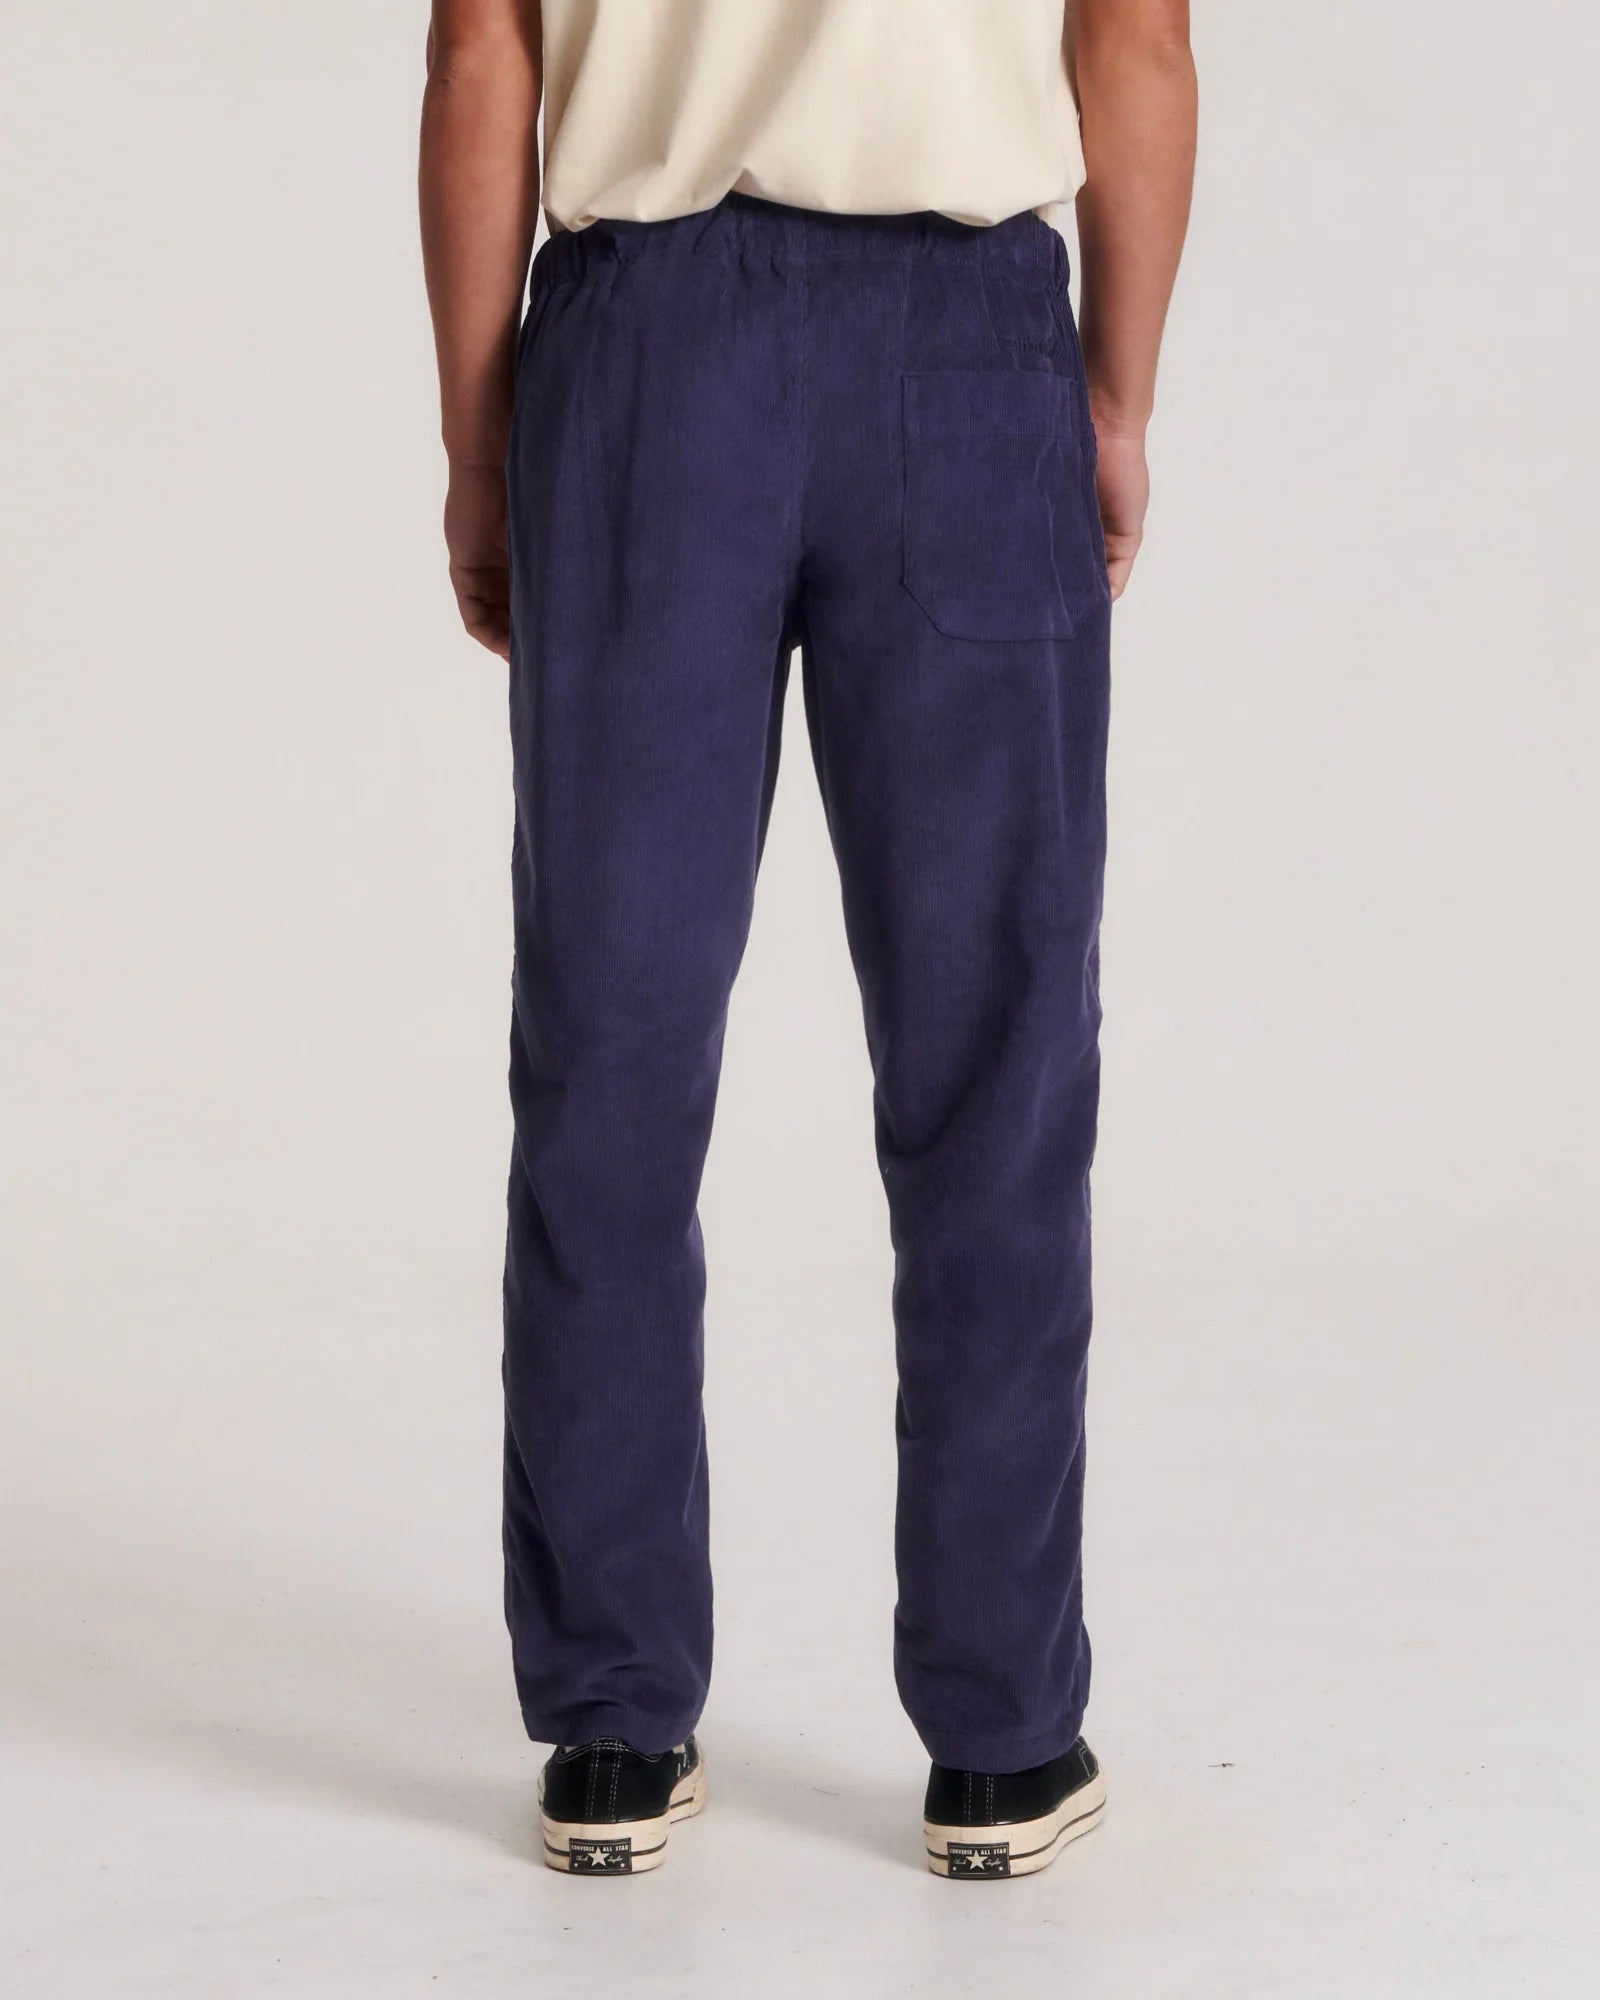 CRITICAL SLIDE All Day Cord Pant Violet Men's Pants The Critical Slide Society 